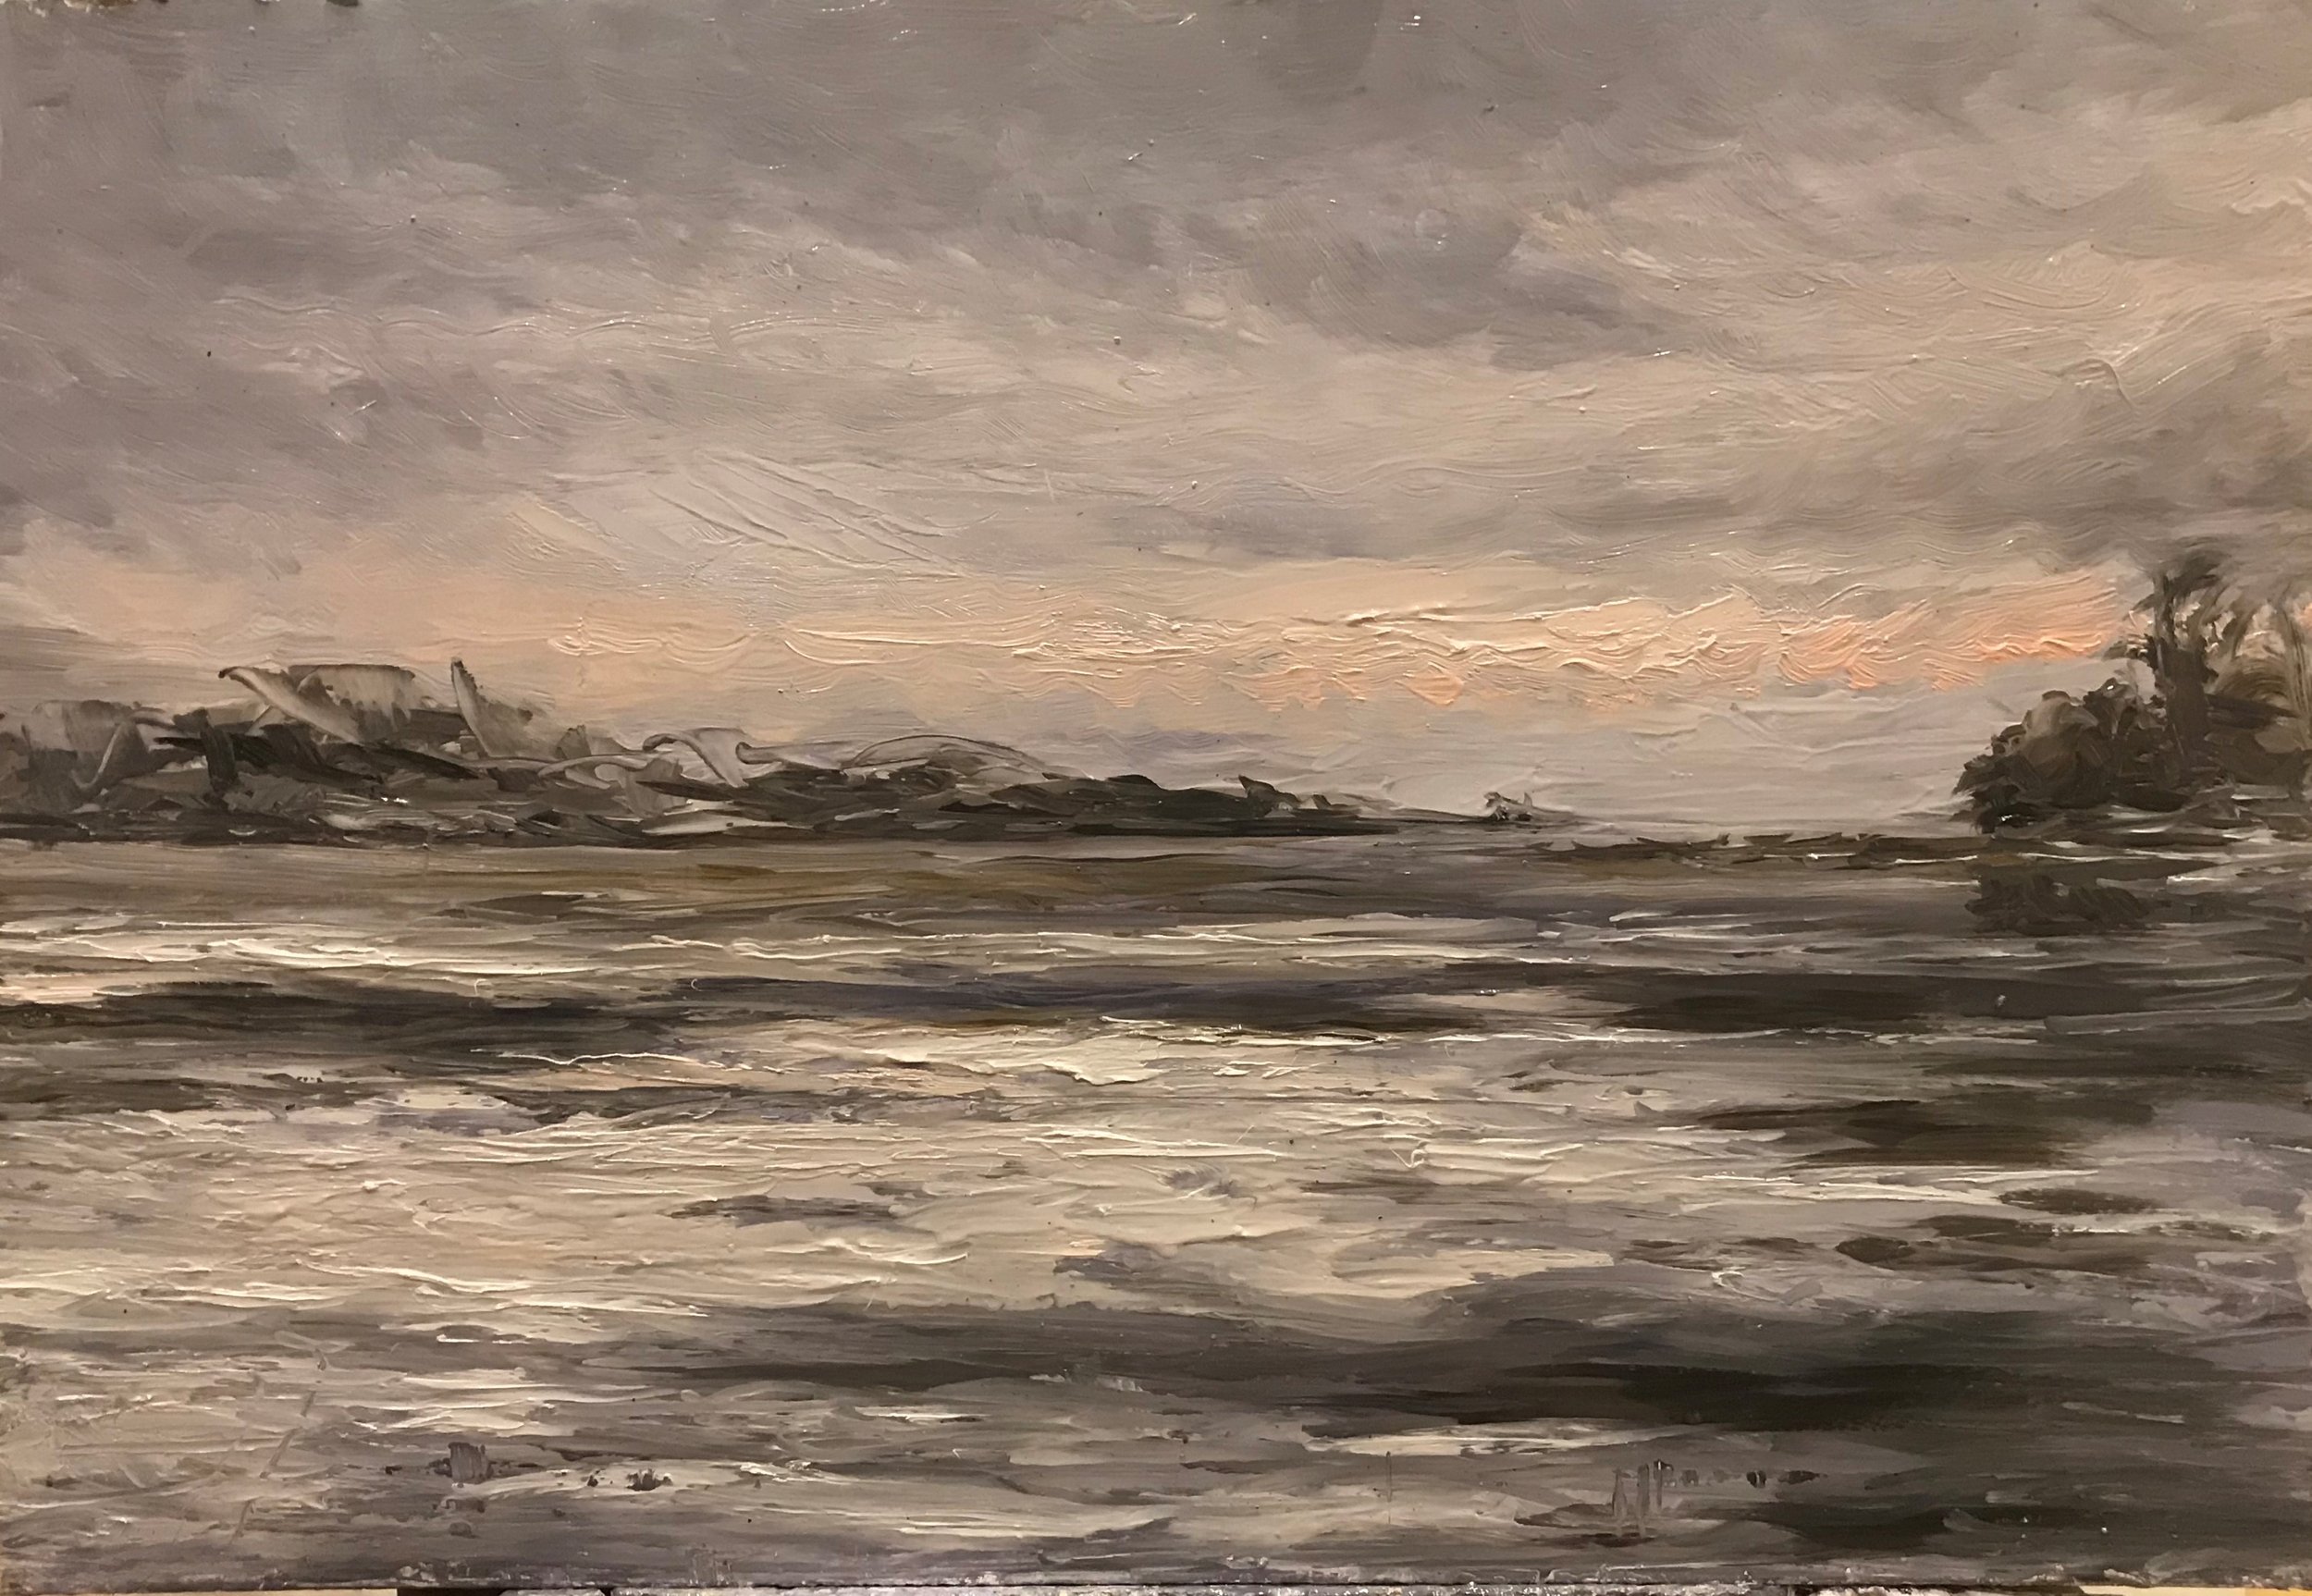 21-02-03    Gray Sunset on Icy Great Harbor      Oil on Panel     12 x 18 inches.jpg